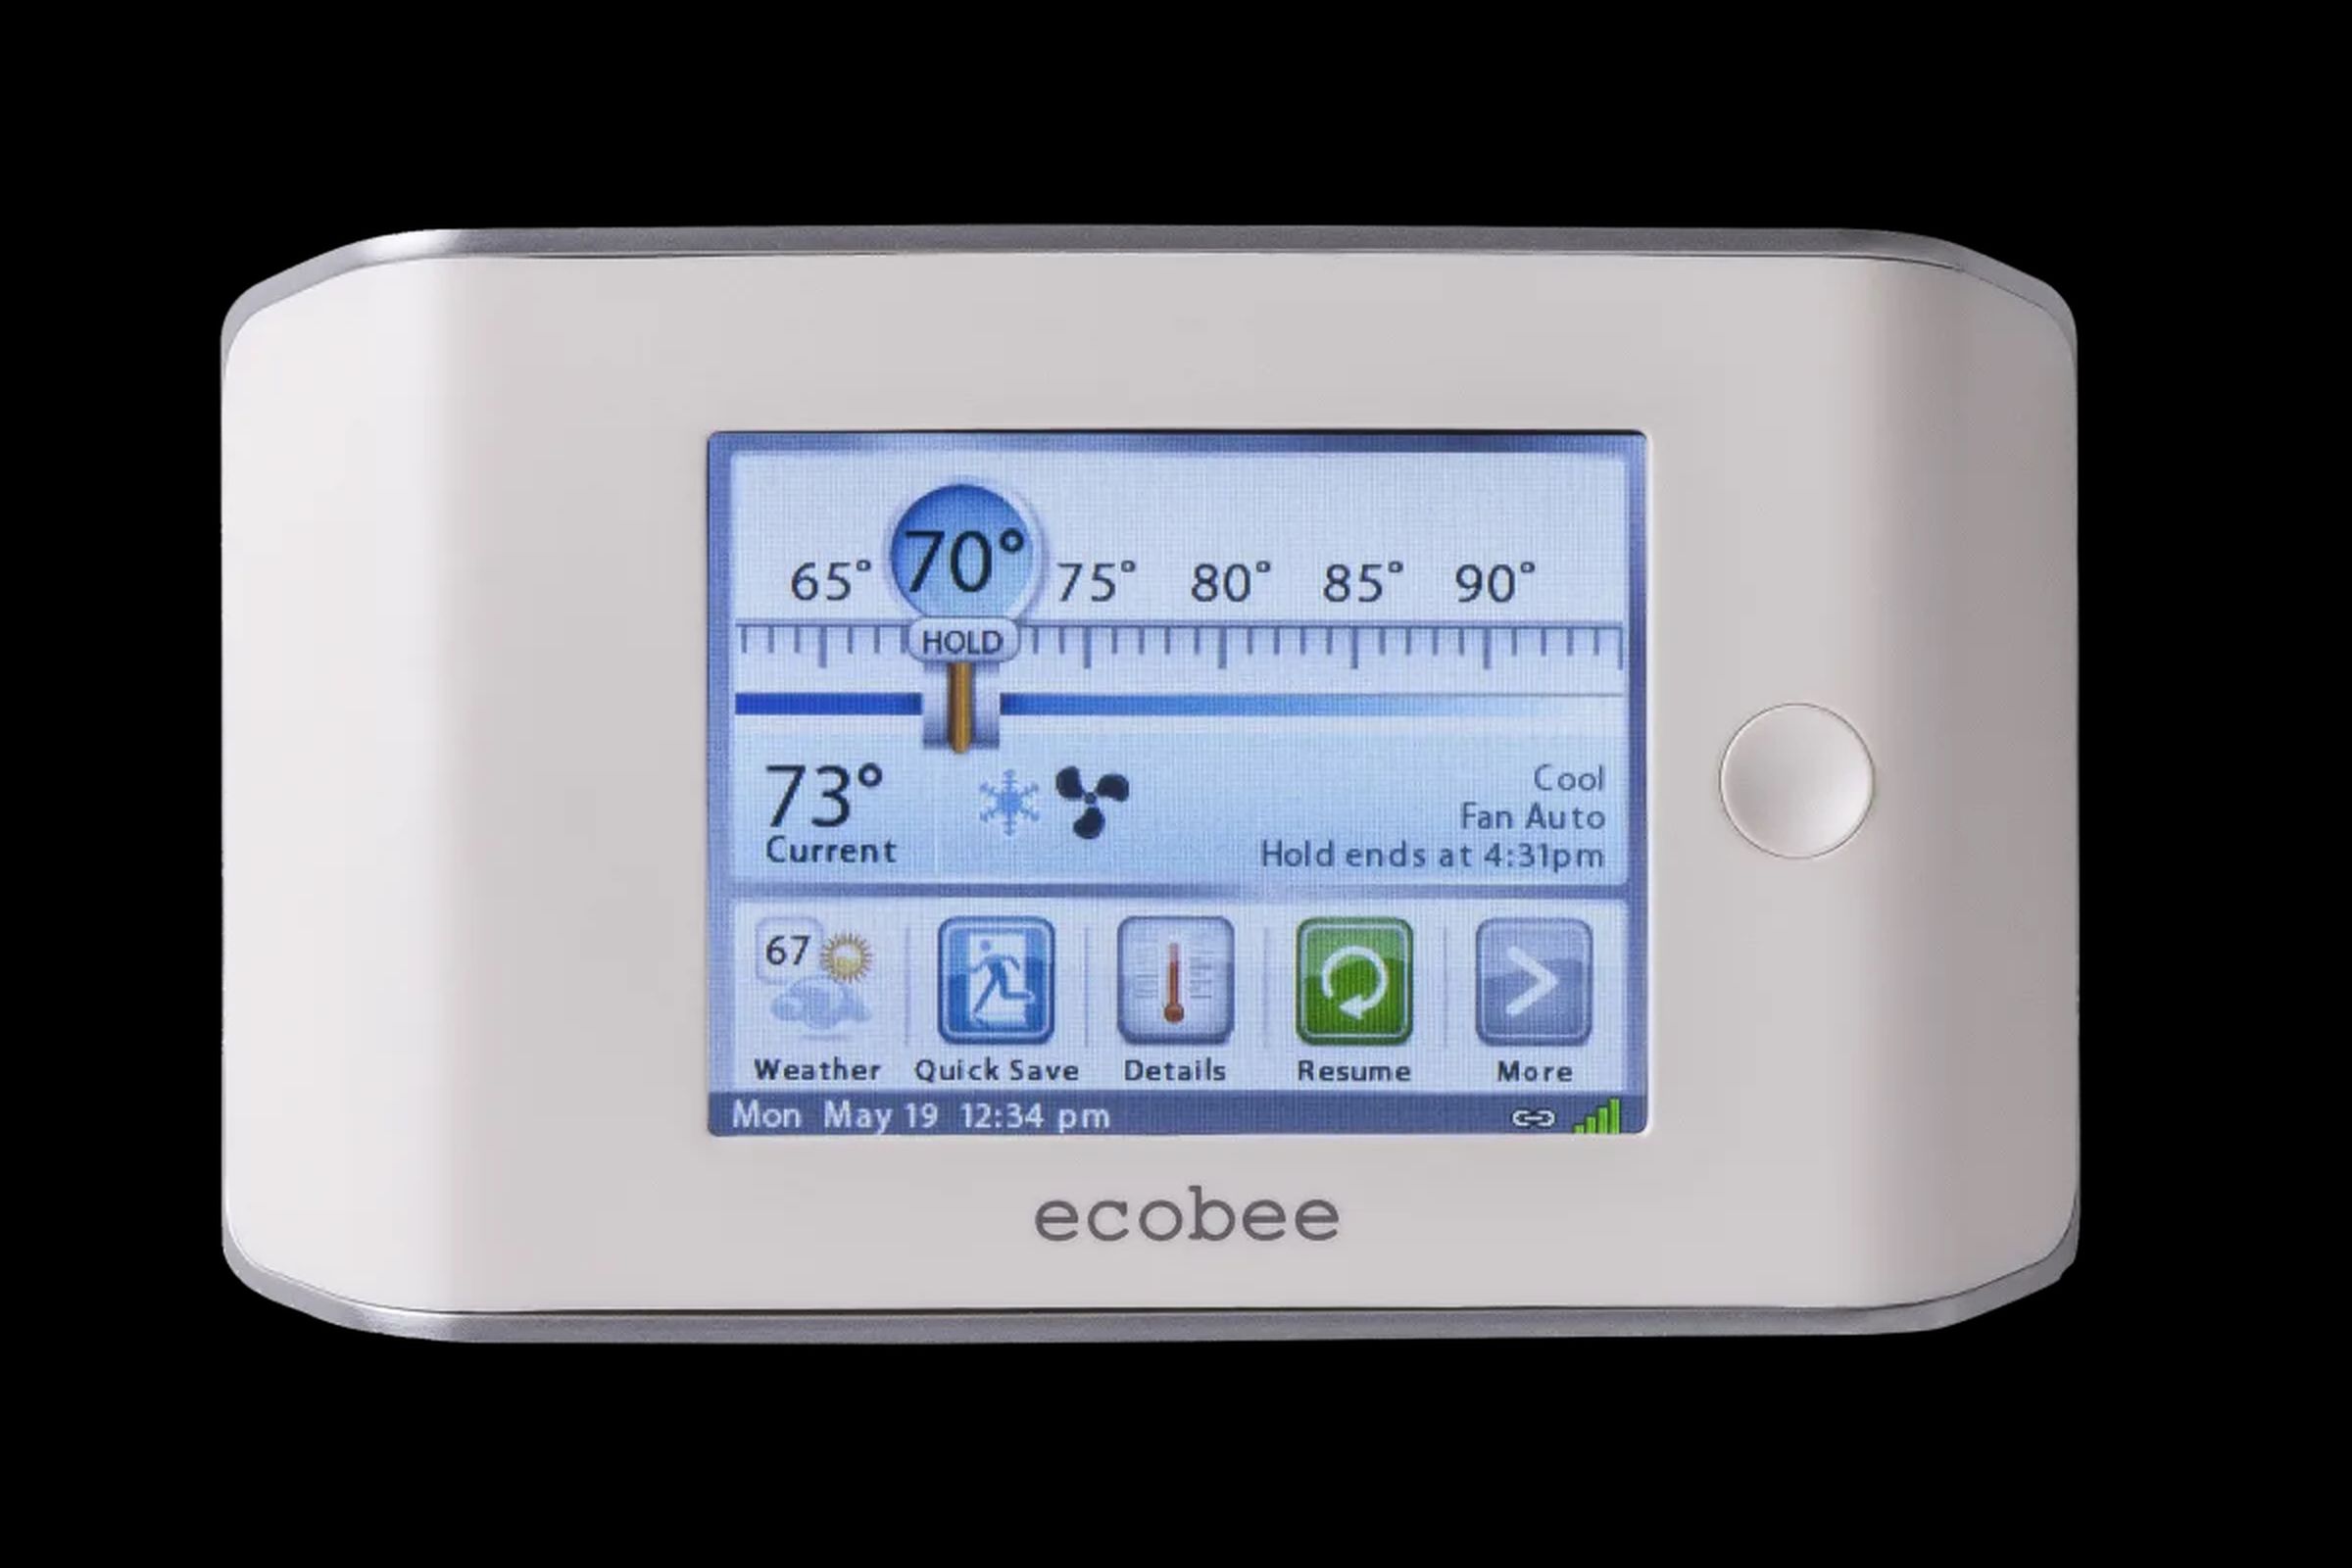 The Ecobee Smart Thermostat will lose its smarts on July 31st.